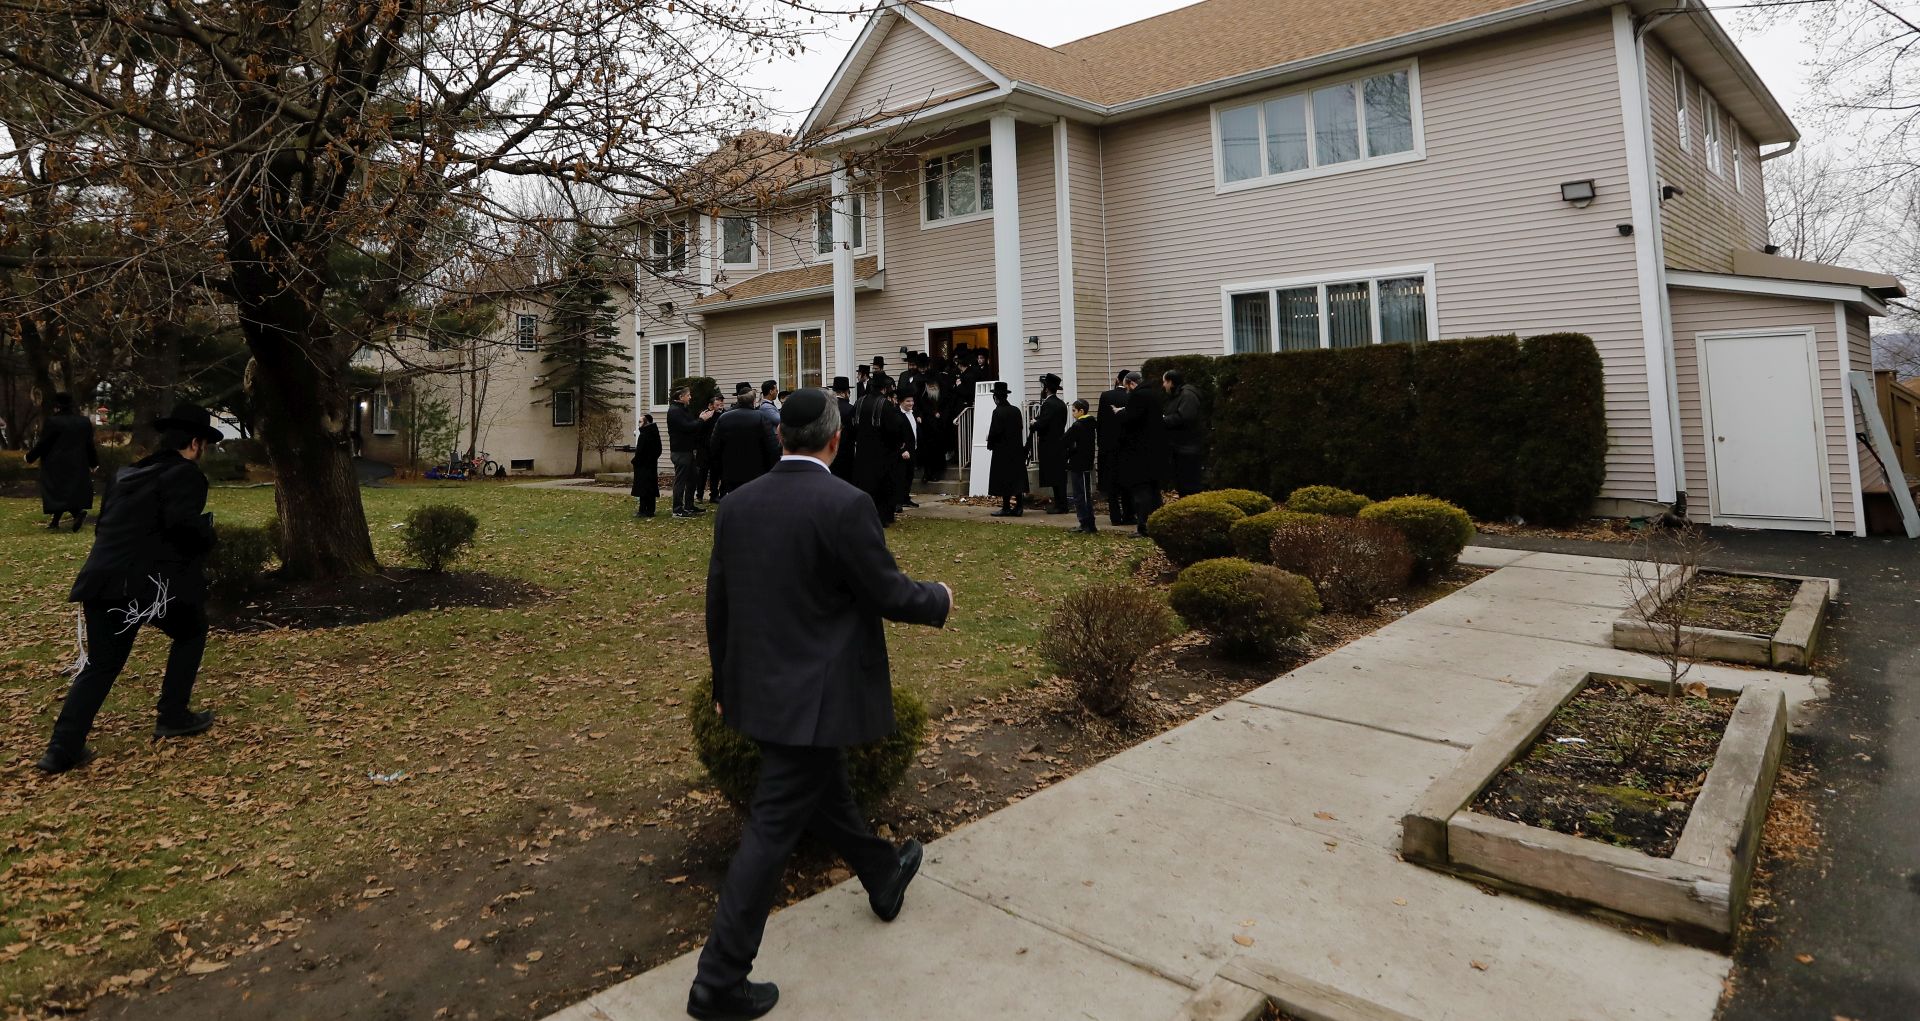 epa08094464 The home of Hasidic rabbi Chaim Leibush Rottenberg in Monsey, New York, USA, 29 December 2019. On 28 December an intruder with a large knife burst into the home of Hasidic rabbi Chaim Rottenberg in Monsey, New York an upstate suburb and stabbed and wounded five people during a Hanukkah candle lighting ceremony.  EPA/PETER FOLEY